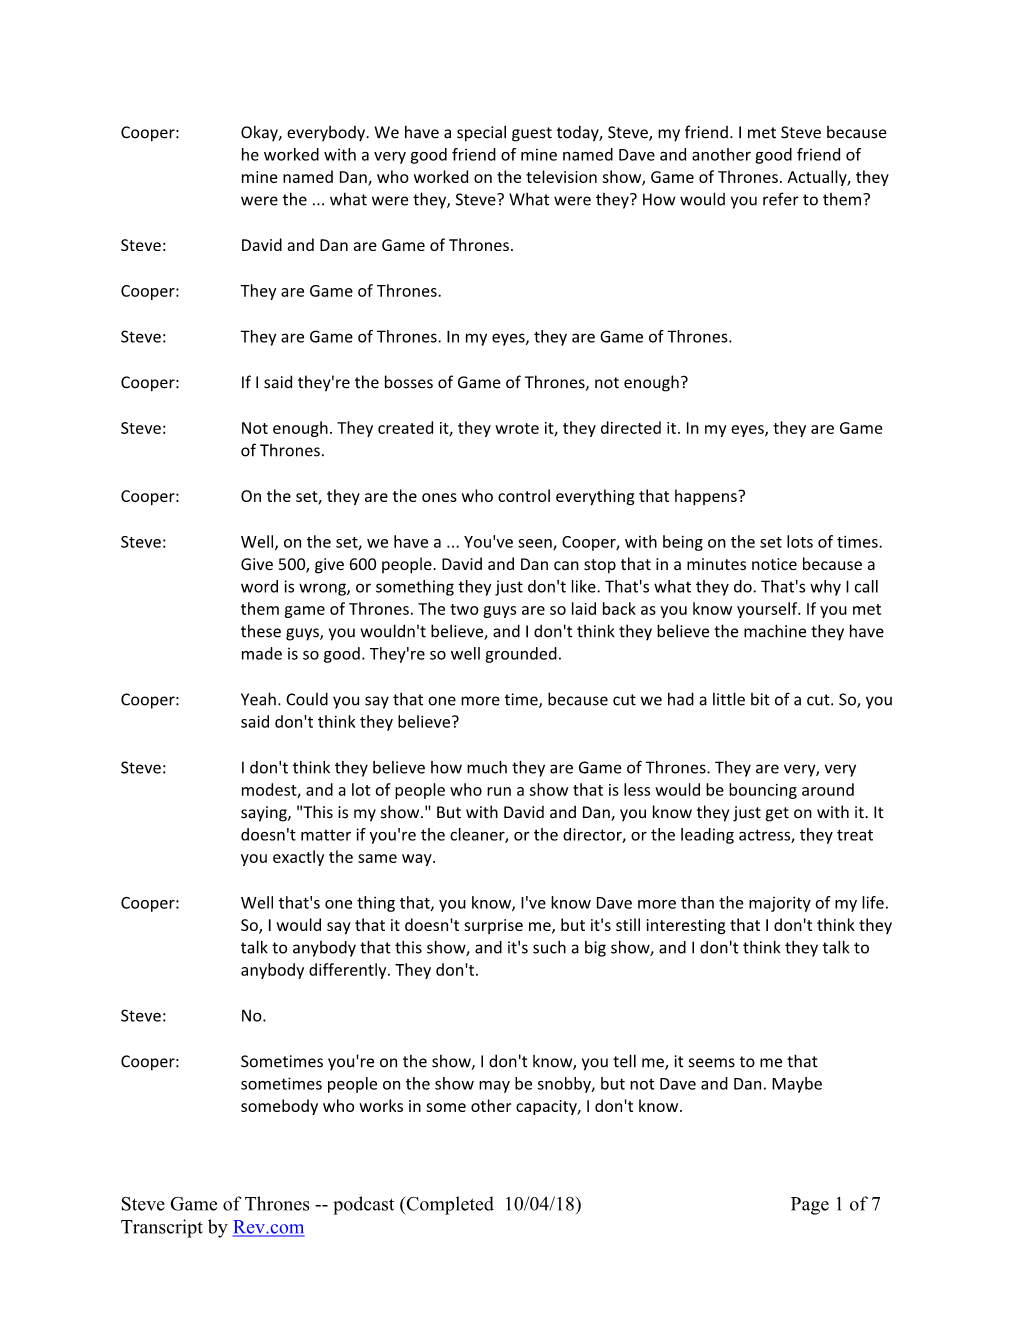 Steve Game of Thrones -- Podcast (Completed 10/04/18) Page 1 of 7 Transcript by Rev.Com Steve: David and Dan Are Just, They're Two Nice Guys